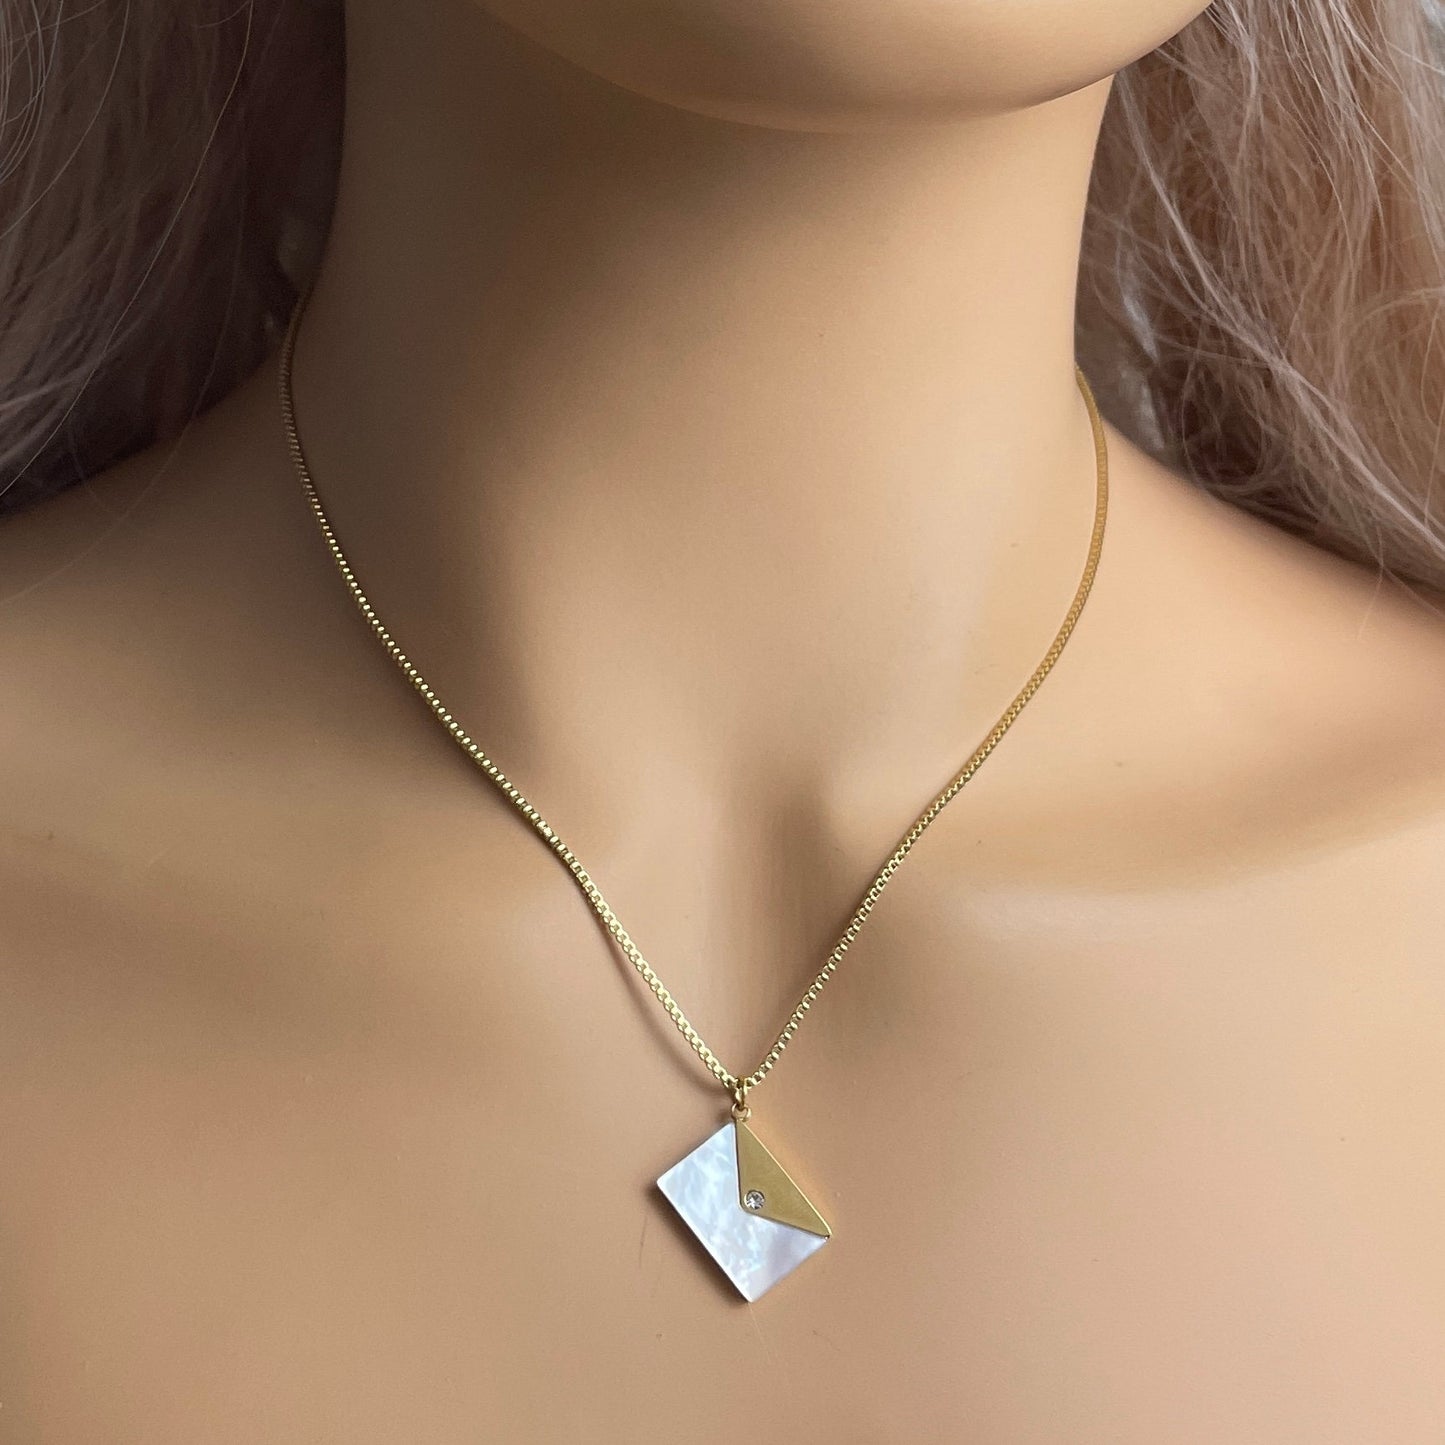 Gold Envelope Necklace with Mother of Pearl - Minimalist Layering Necklace